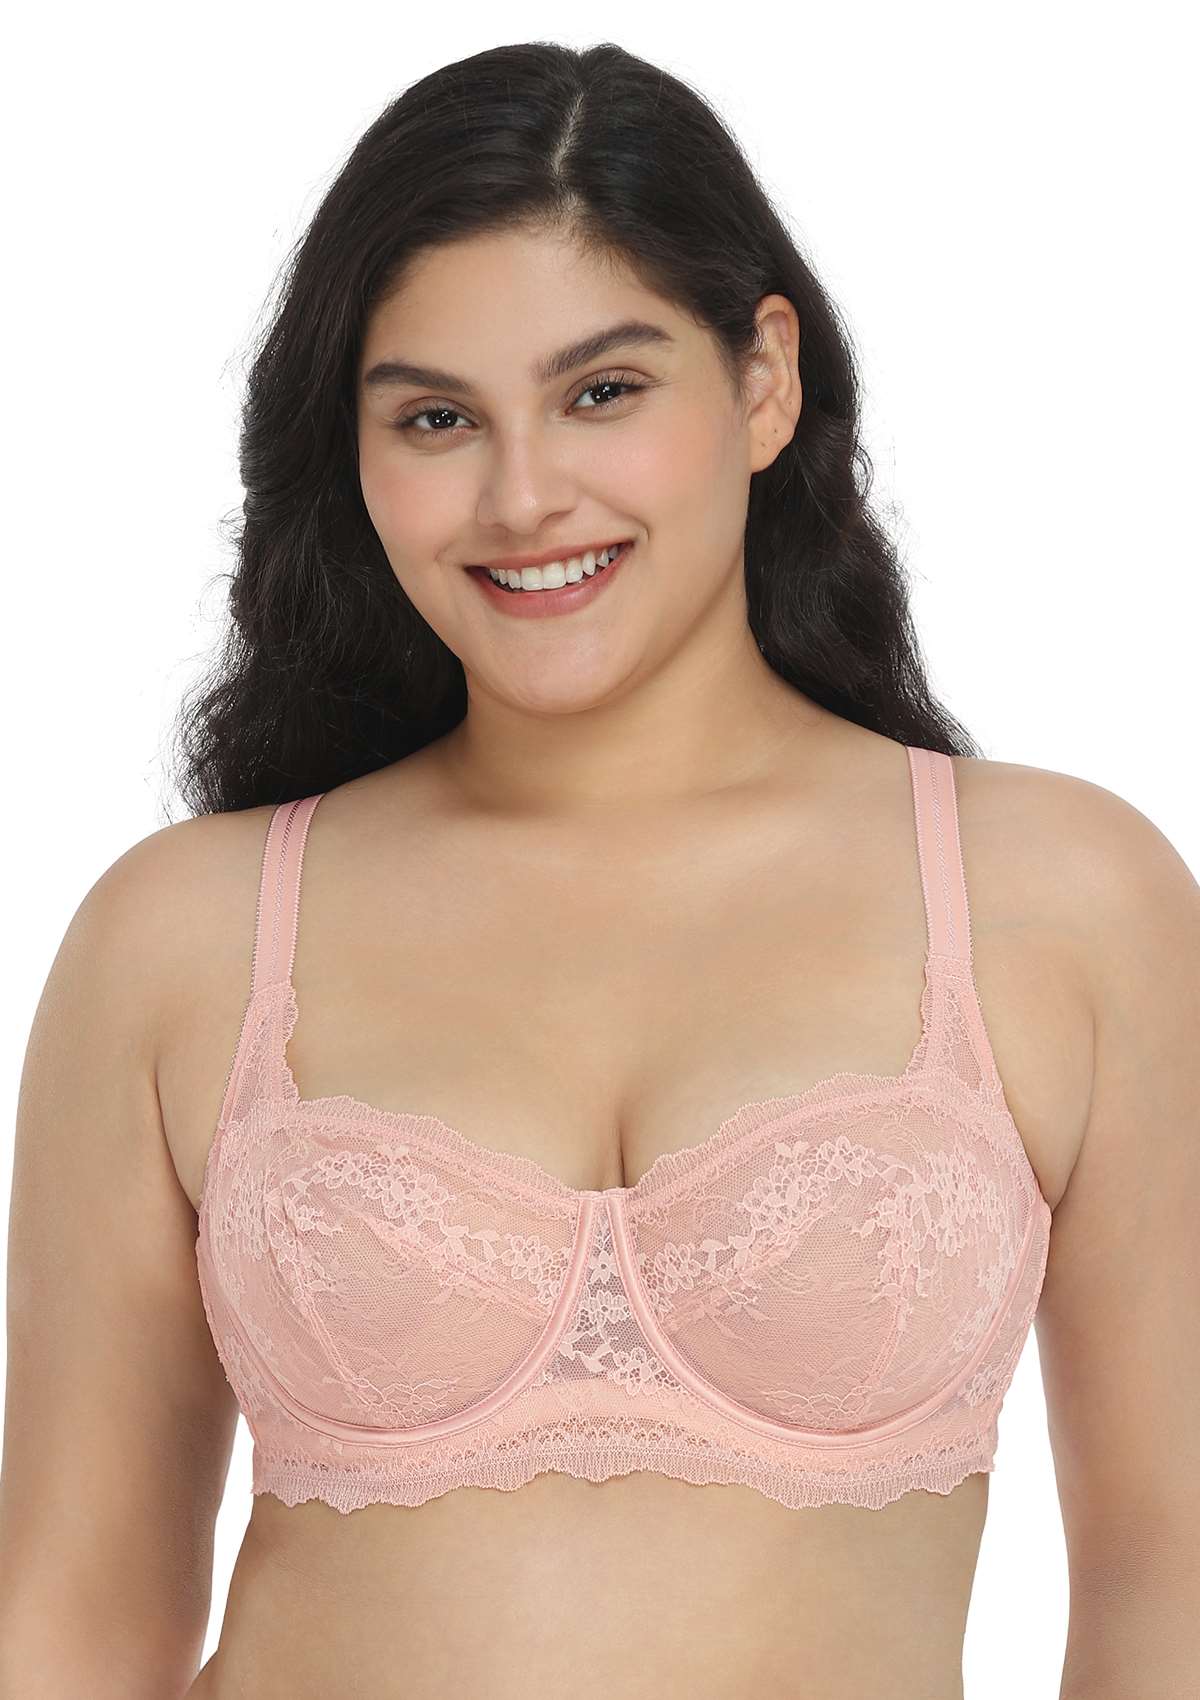 HSIA I Do Floral Lace Bridal Balconette Beautiful Bra For Special Day - Pink / 42 / DD/E